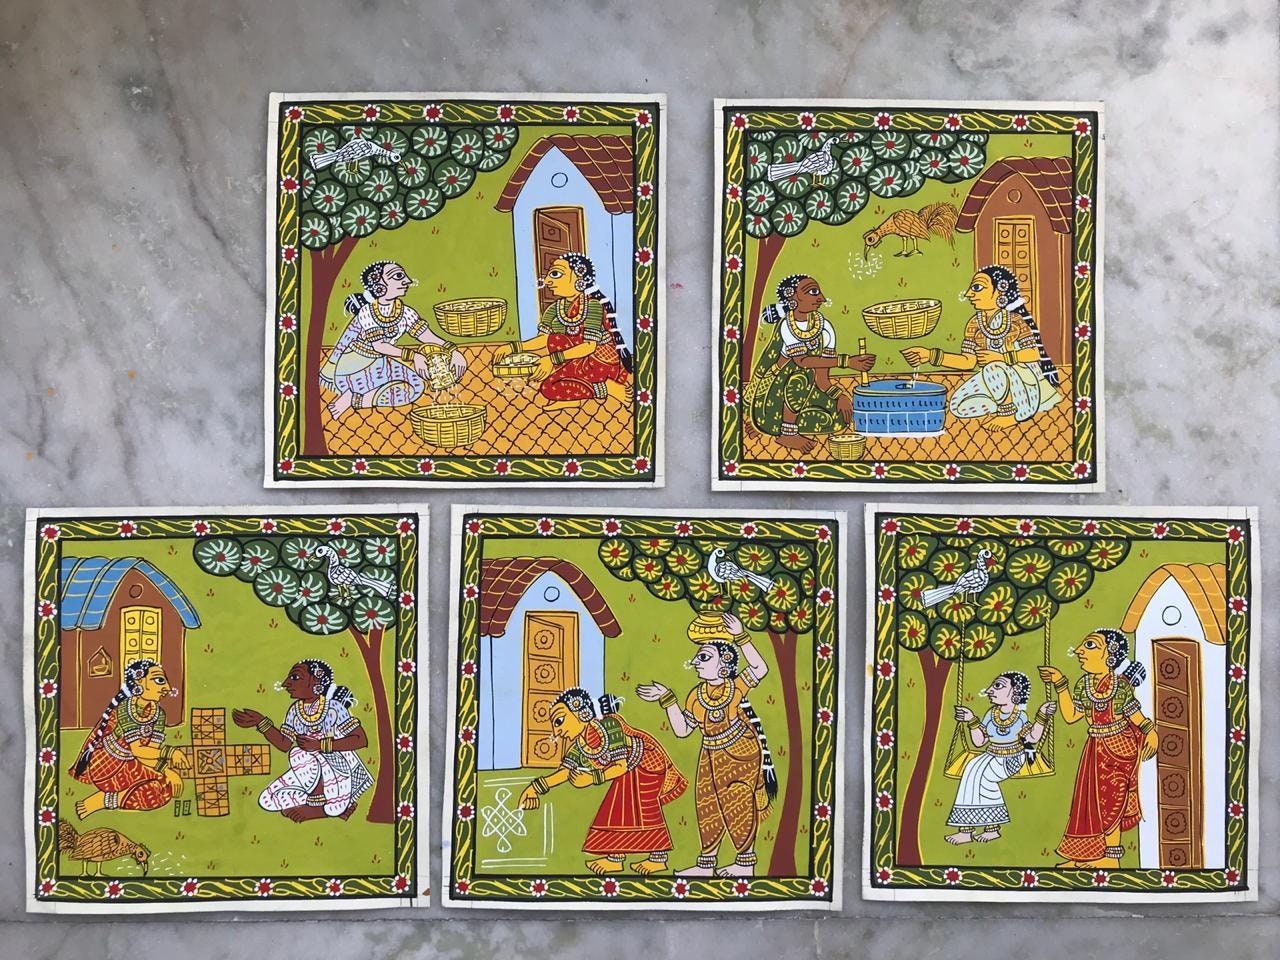 Indian Culture, People, Traditions depicted by rare and narrative eco-friendly Cheriyal Paintings